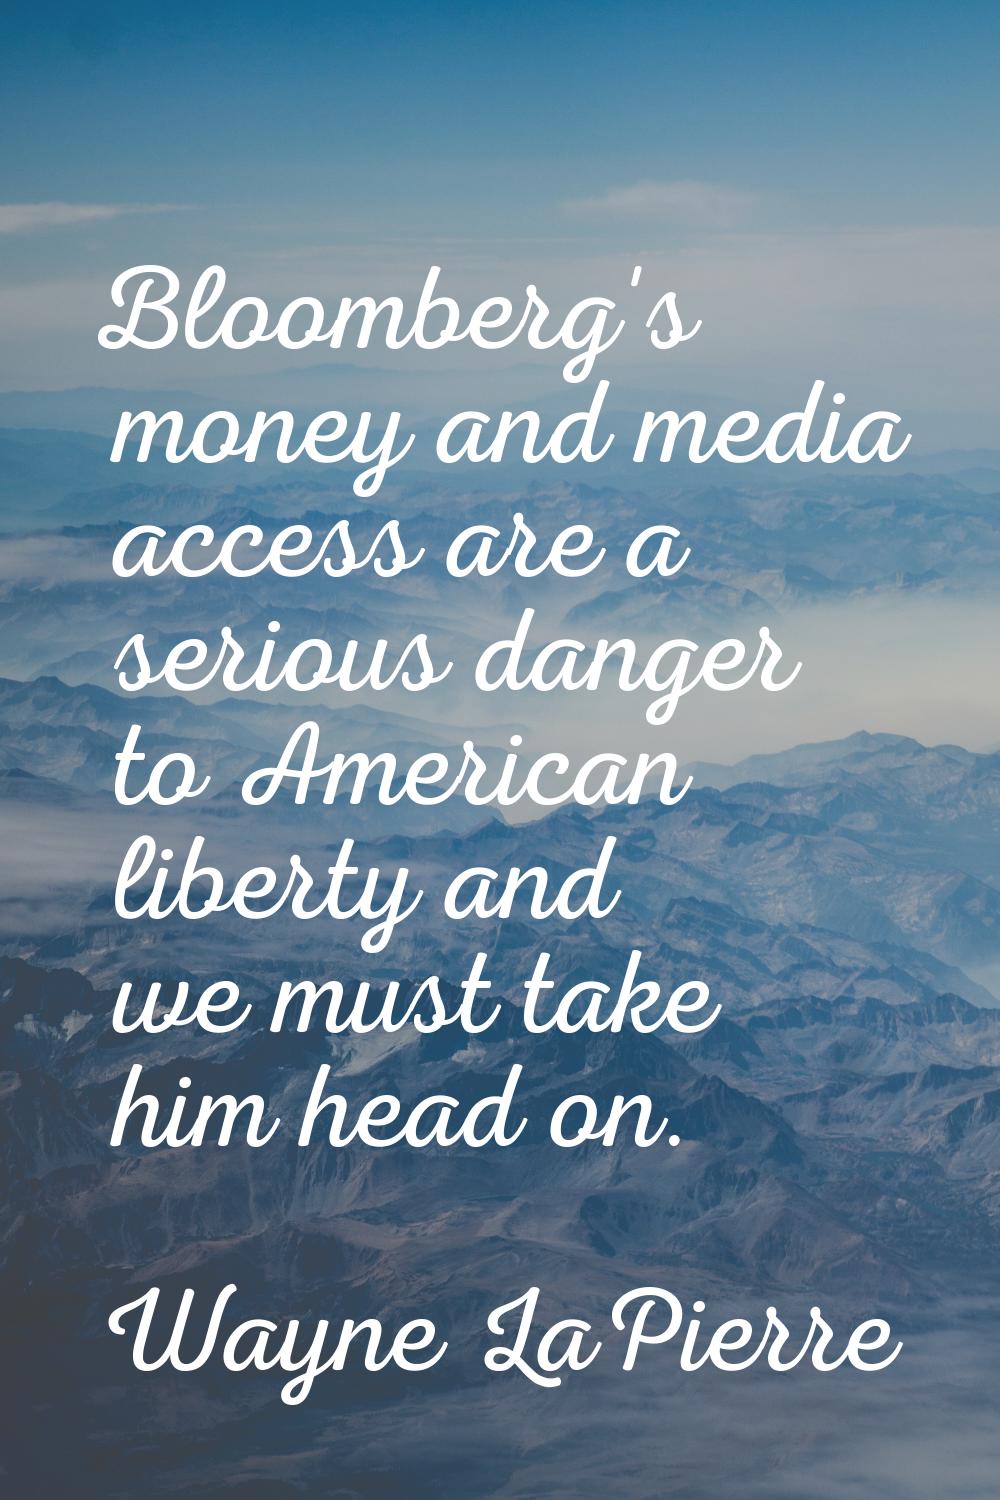 Bloomberg's money and media access are a serious danger to American liberty and we must take him he